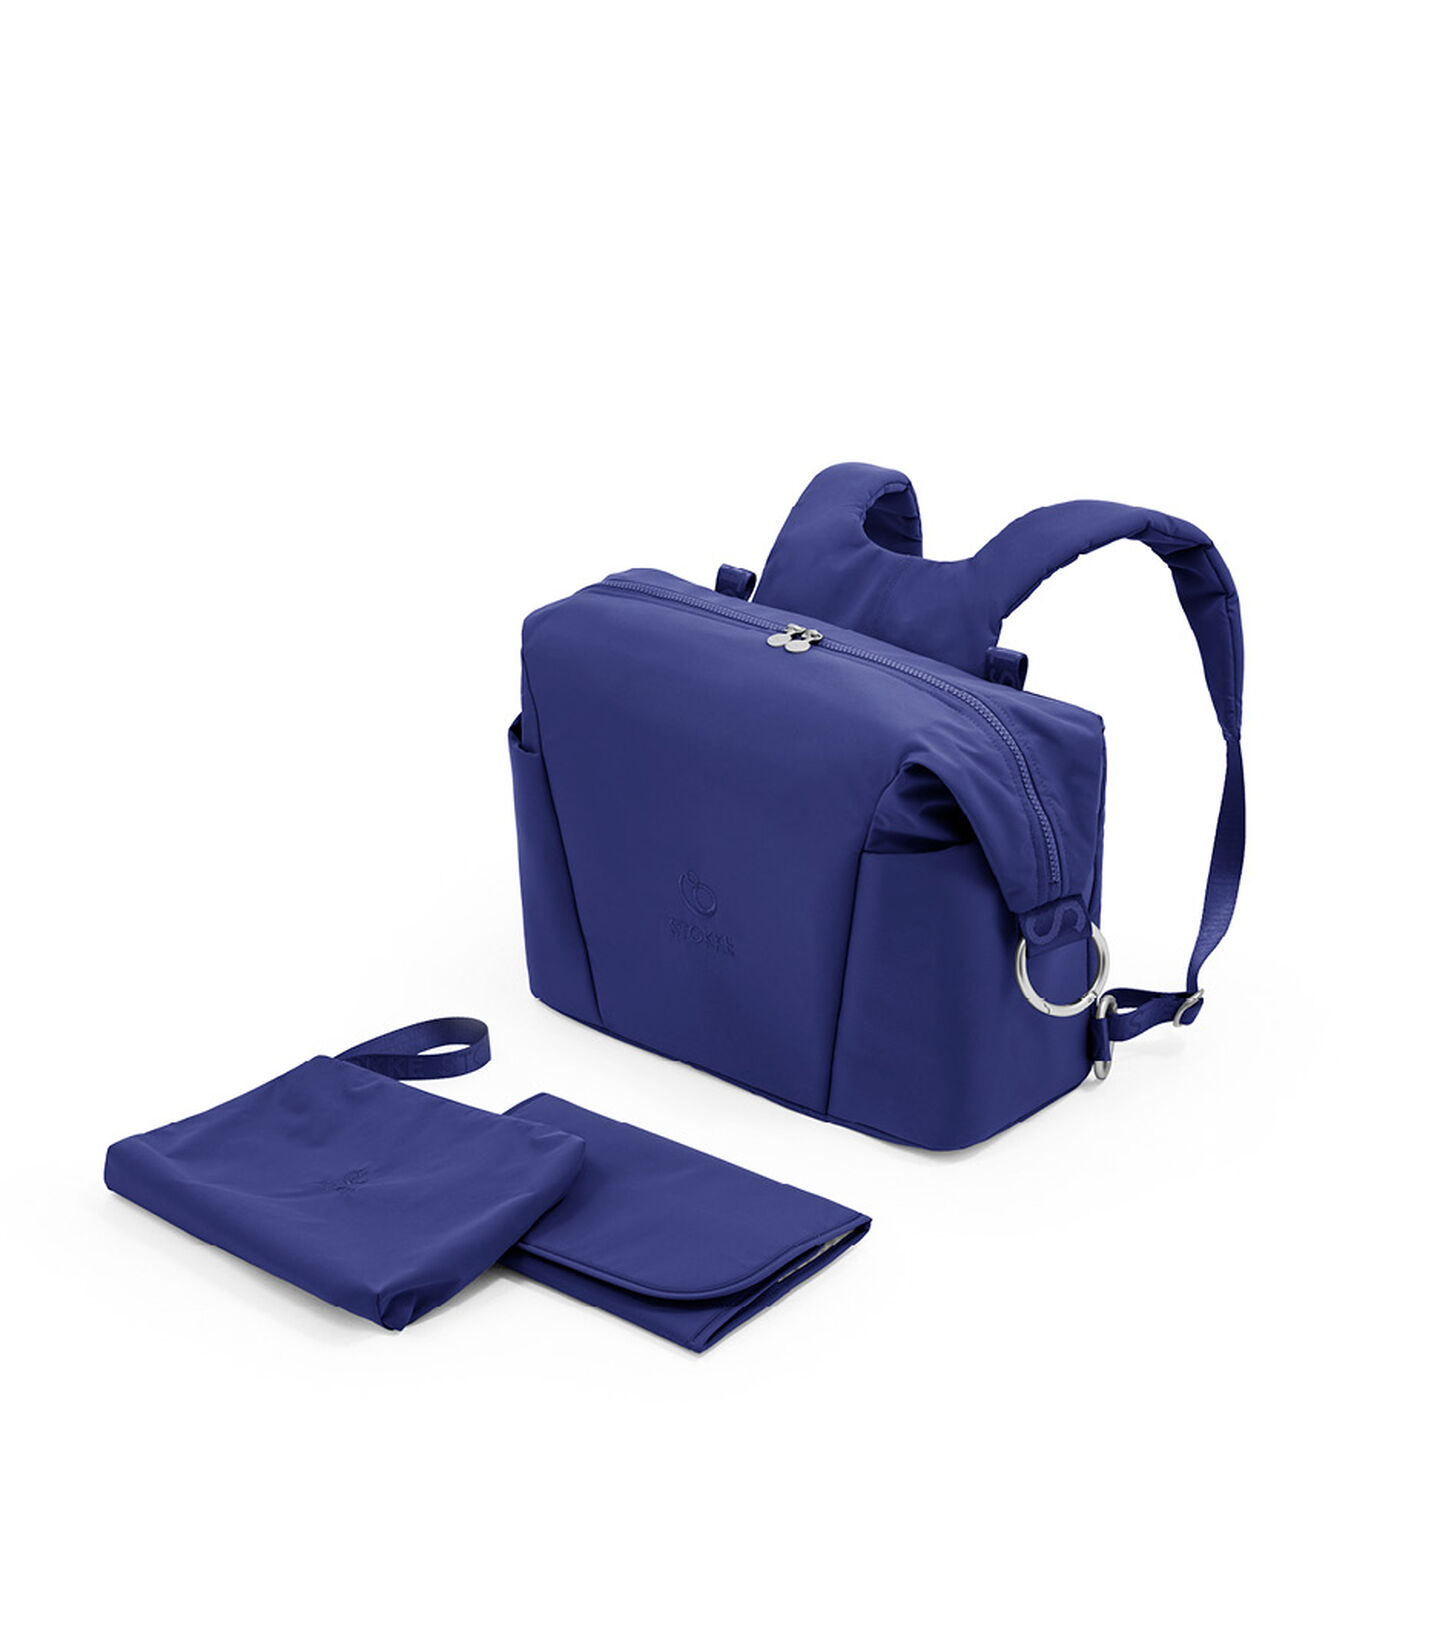 Stokke® Xplory® X Wickeltasche Royal Blue, Royal Blue, mainview view 3